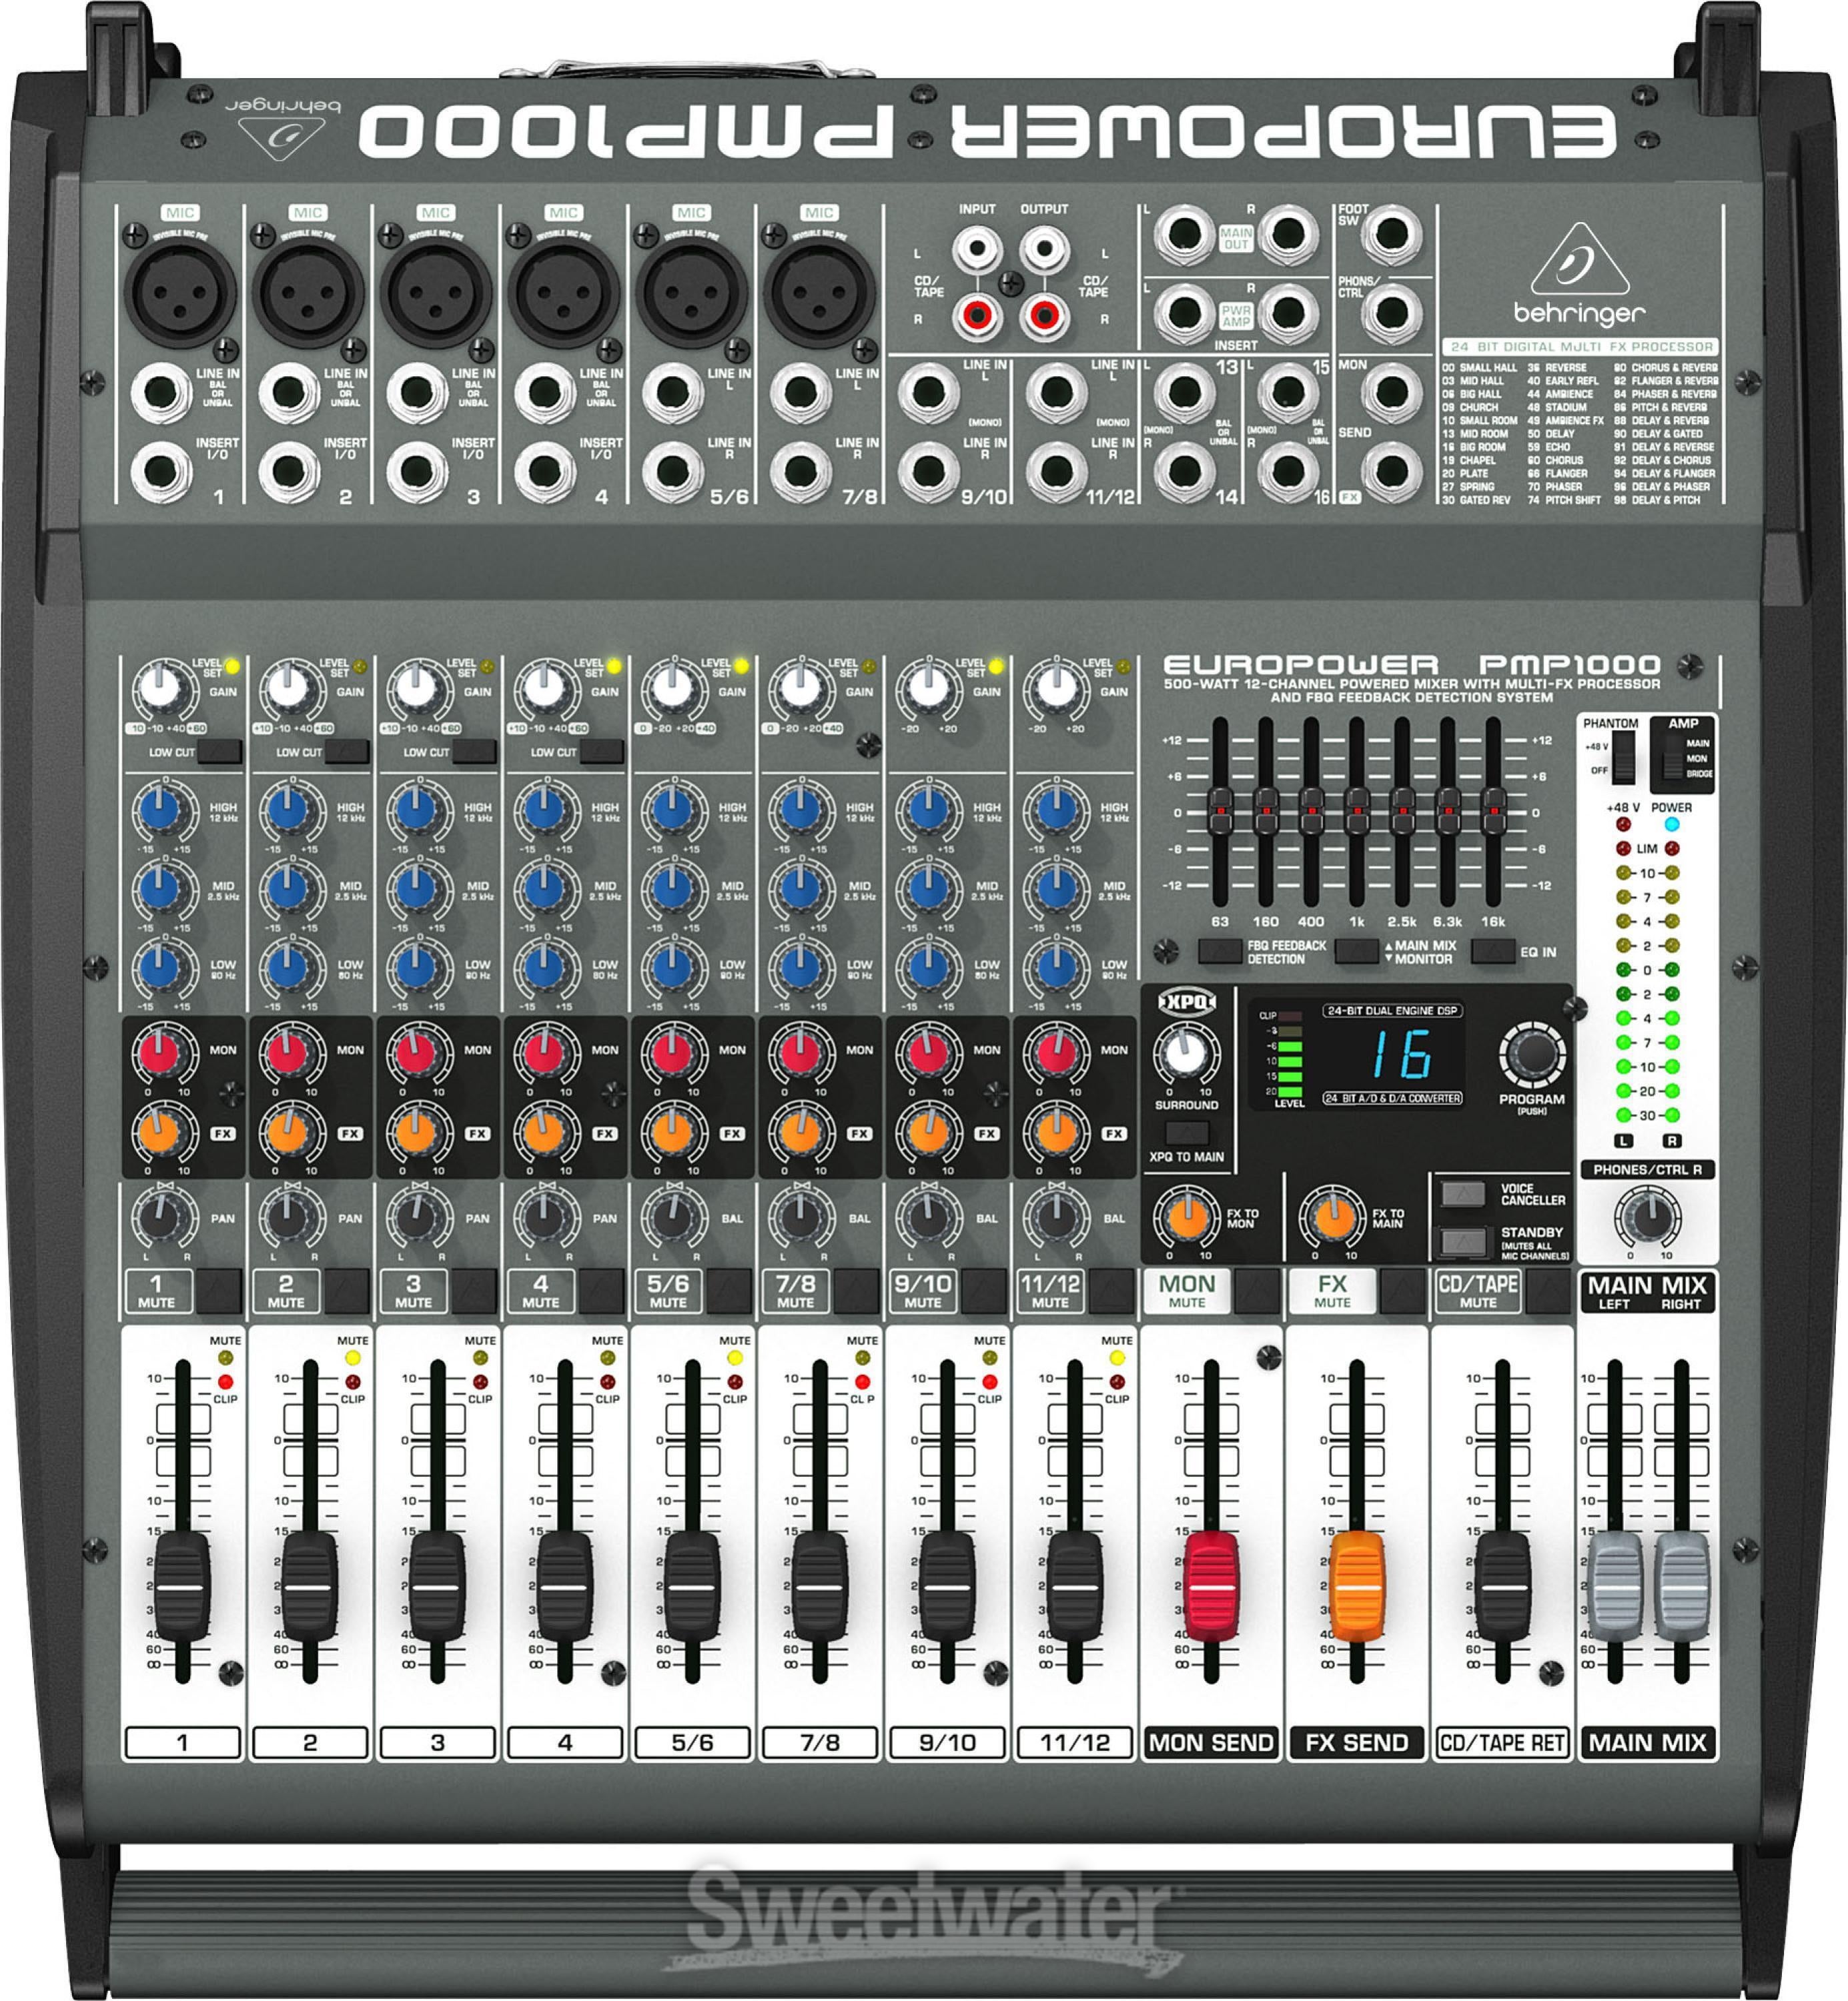 Behringer Europower PMP1000 | Sweetwater